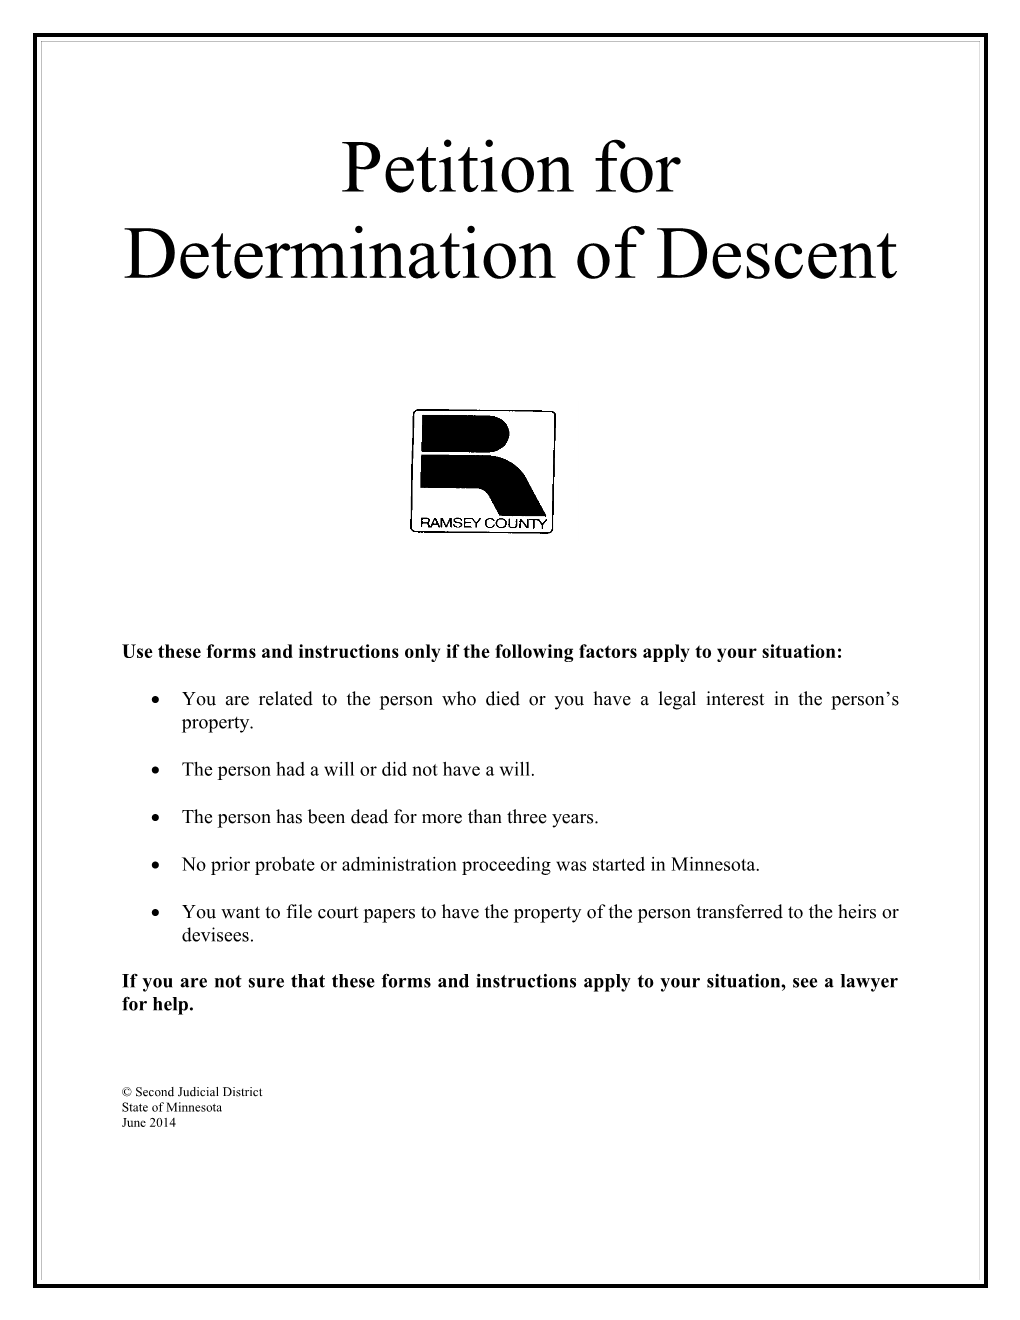 Petition for Determination of Descent